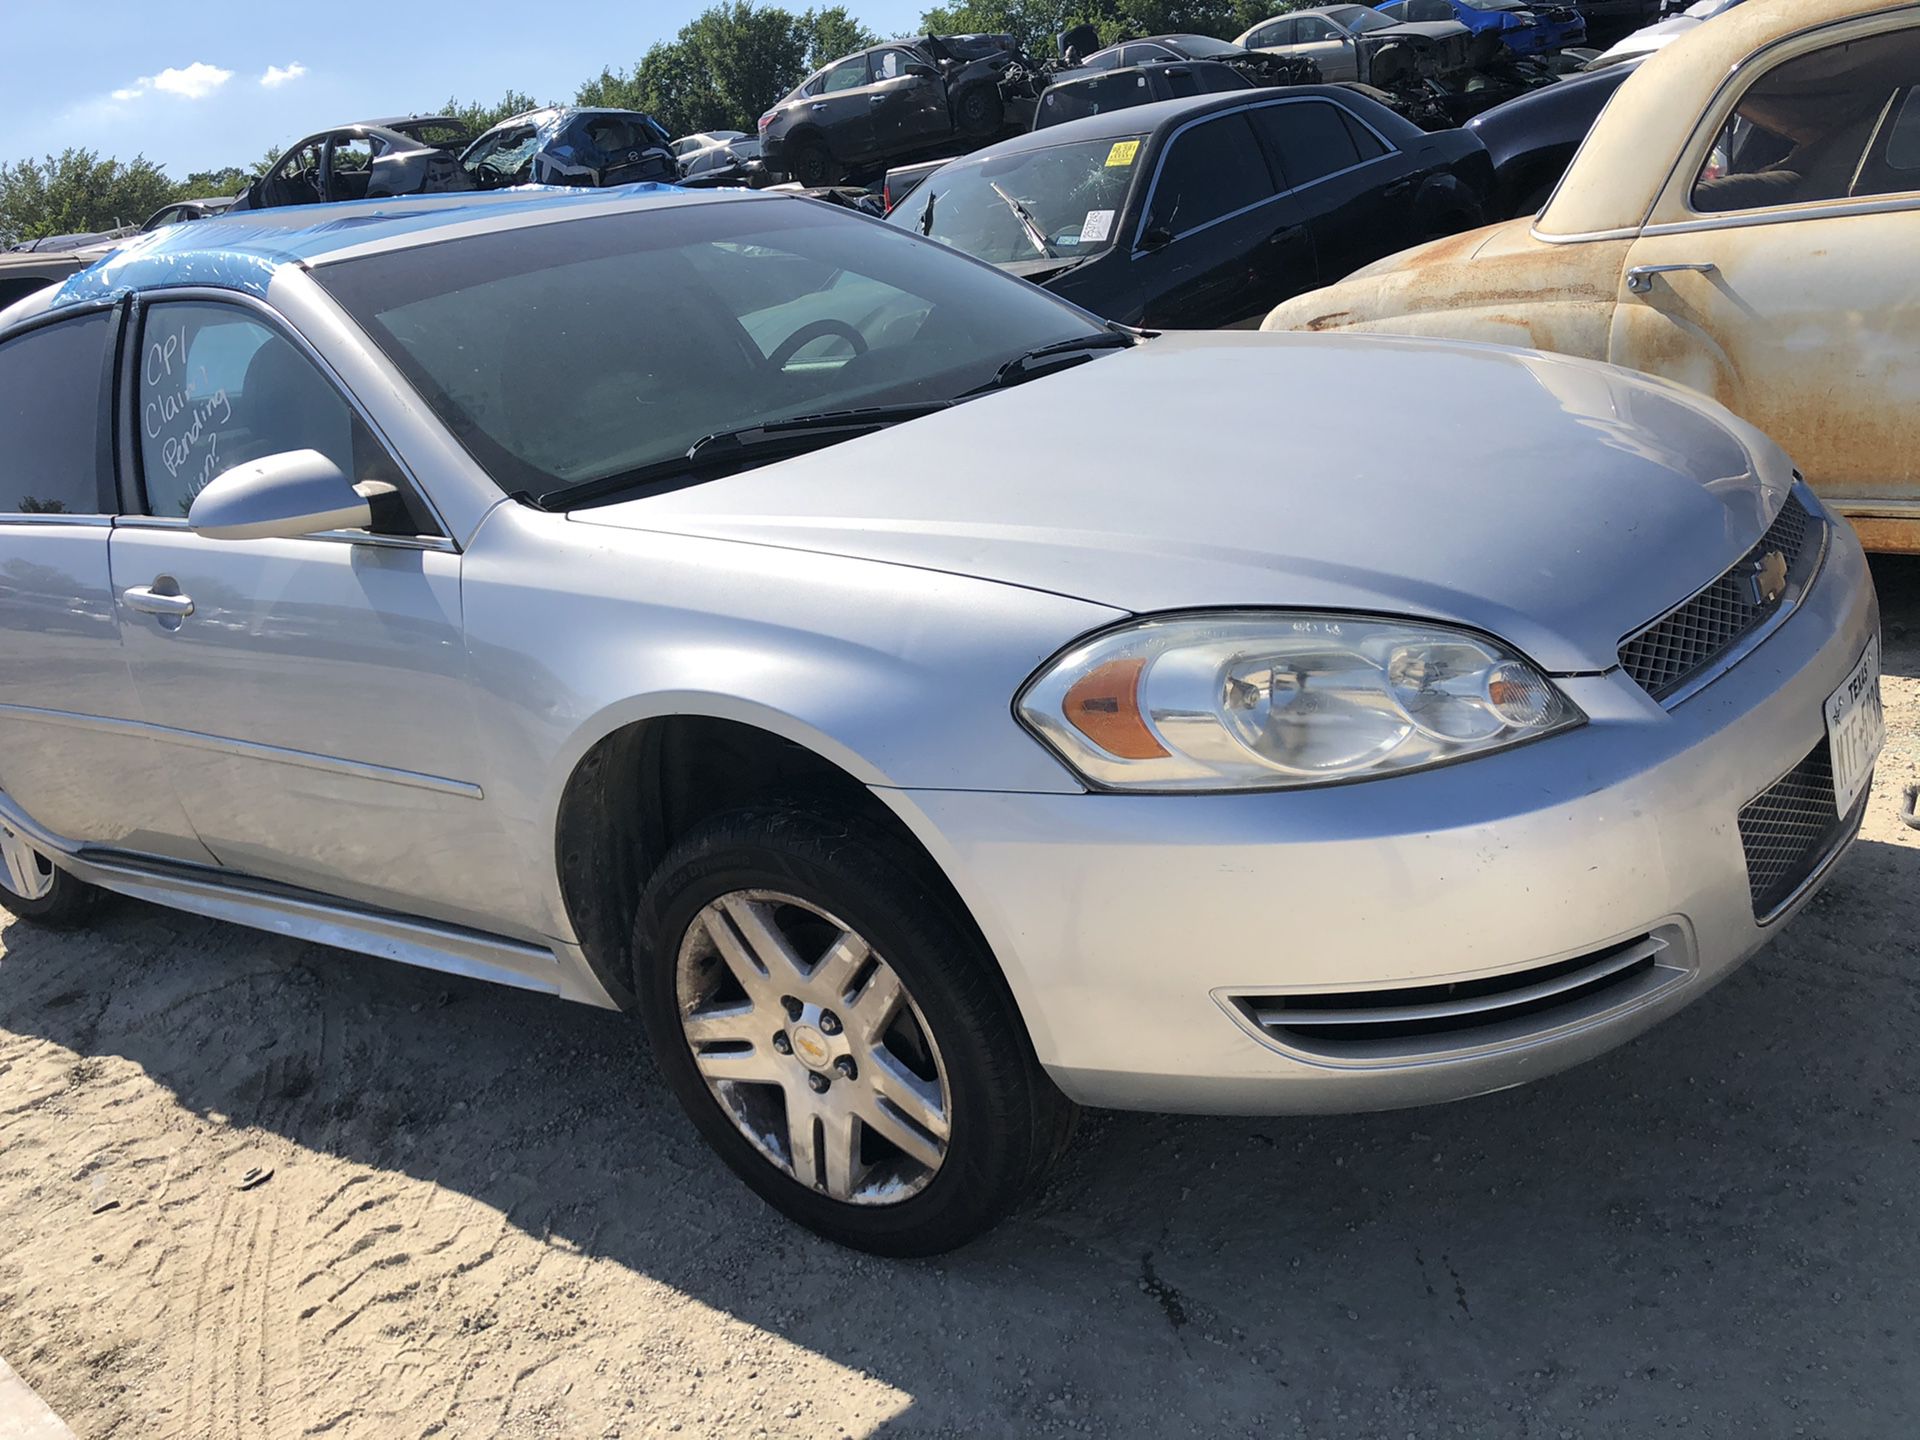 2010 Chevy Impala for parts